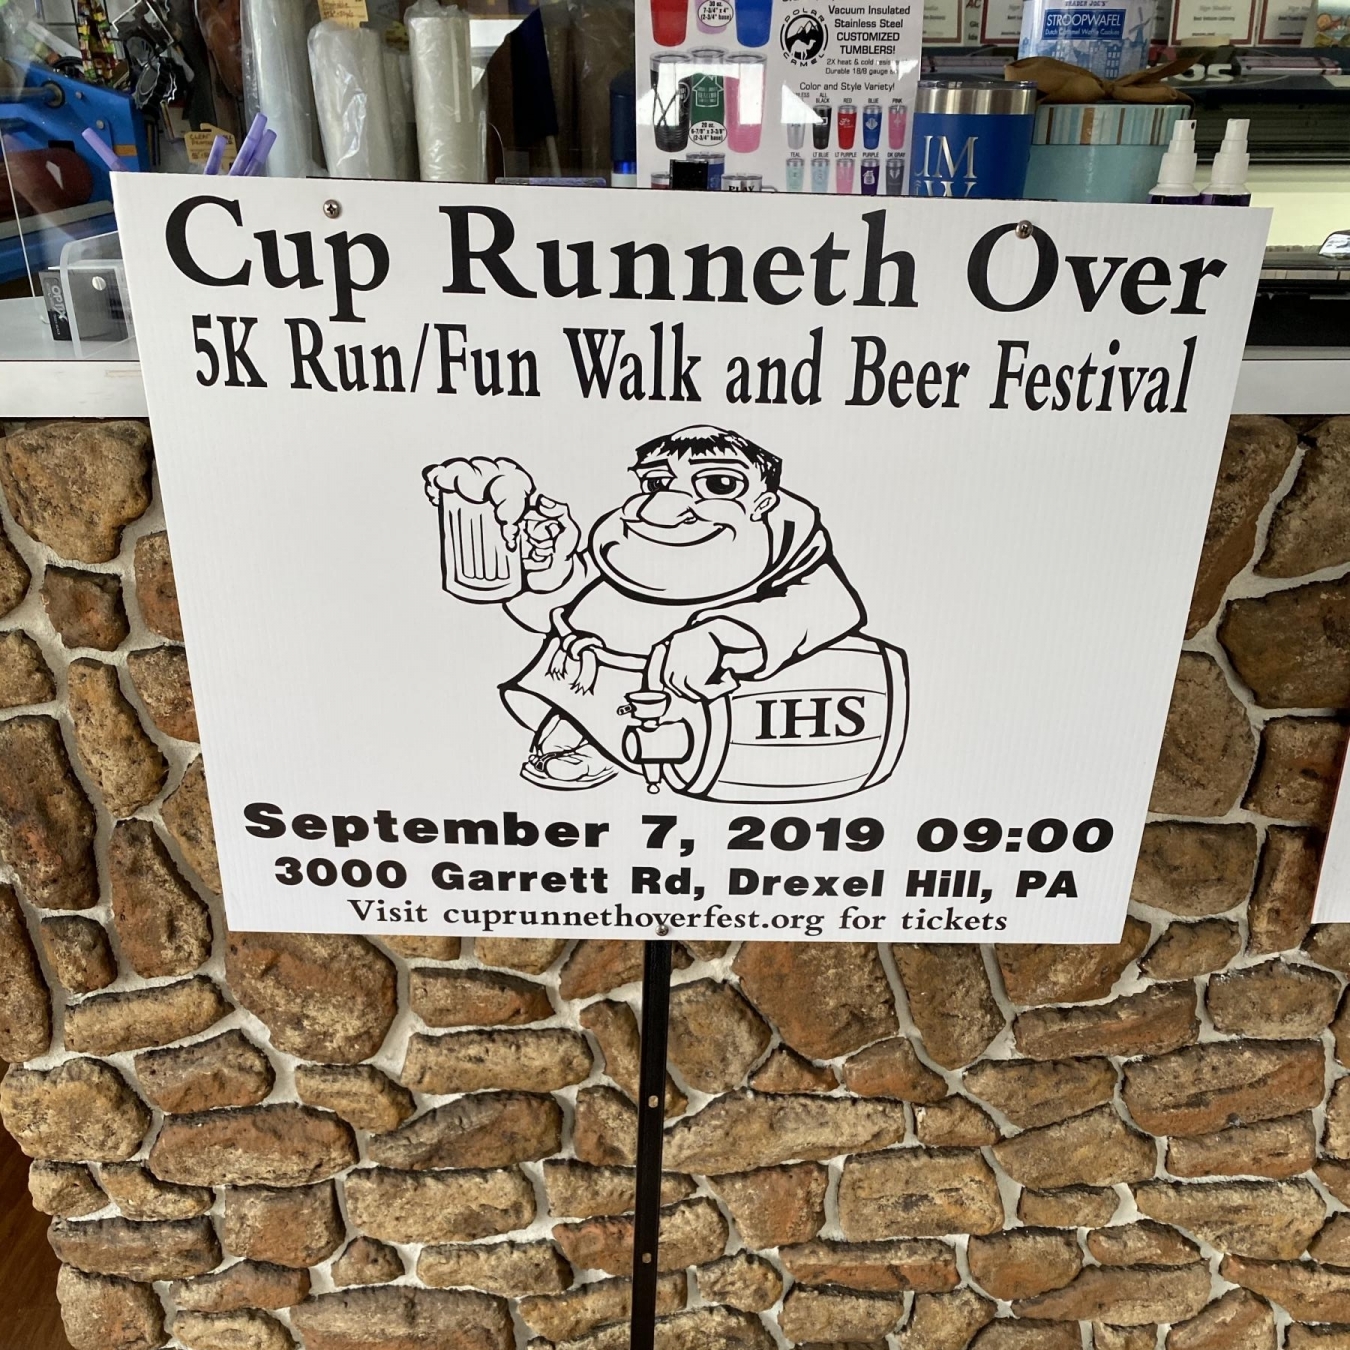 Cup Runneth Over Sign on Heavy Duty Stake